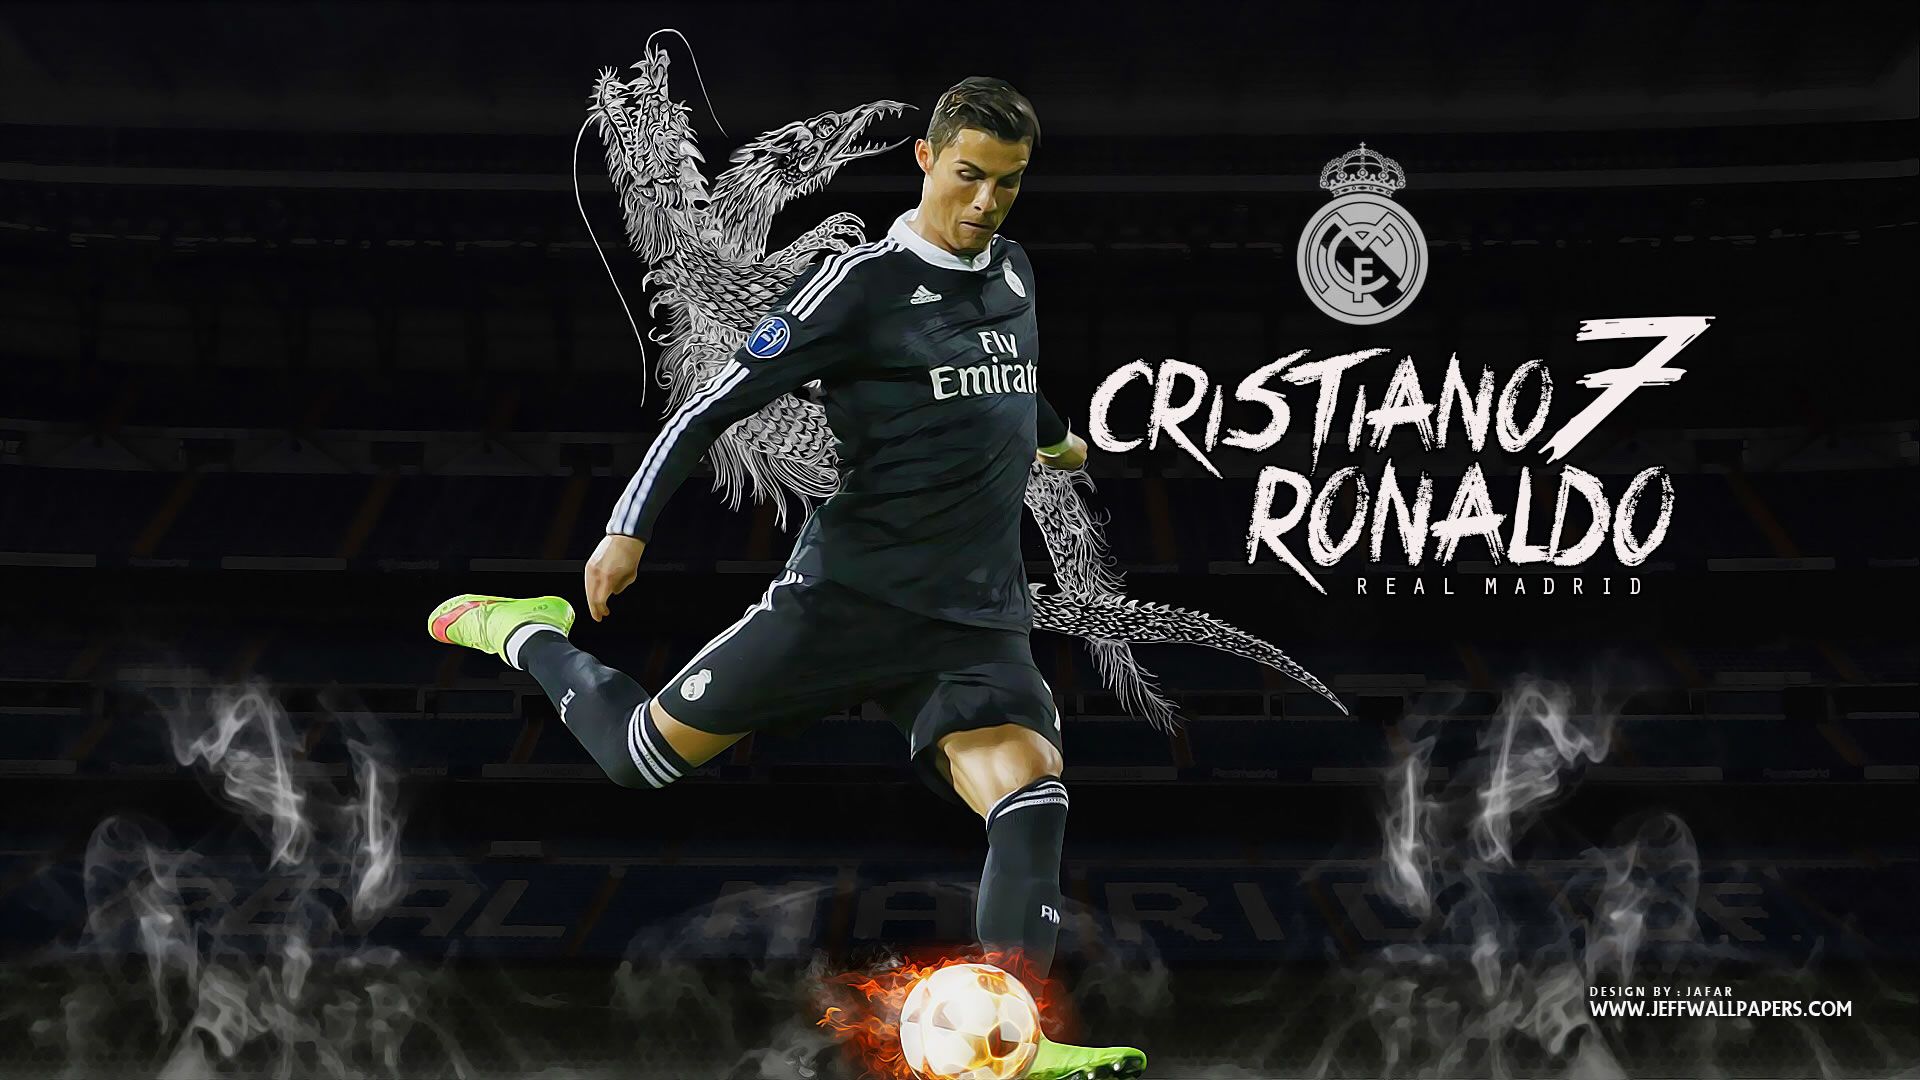 Free download Cristiano Ronaldo Real Madrid wallpaper by Jafarjeef Cristiano [1920x1080] for your Desktop, Mobile & Tablet. Explore Cristiano Ronaldo Wallpaper Real Madrid. Atletico Madrid Wallpaper, CR7 Wallpaper